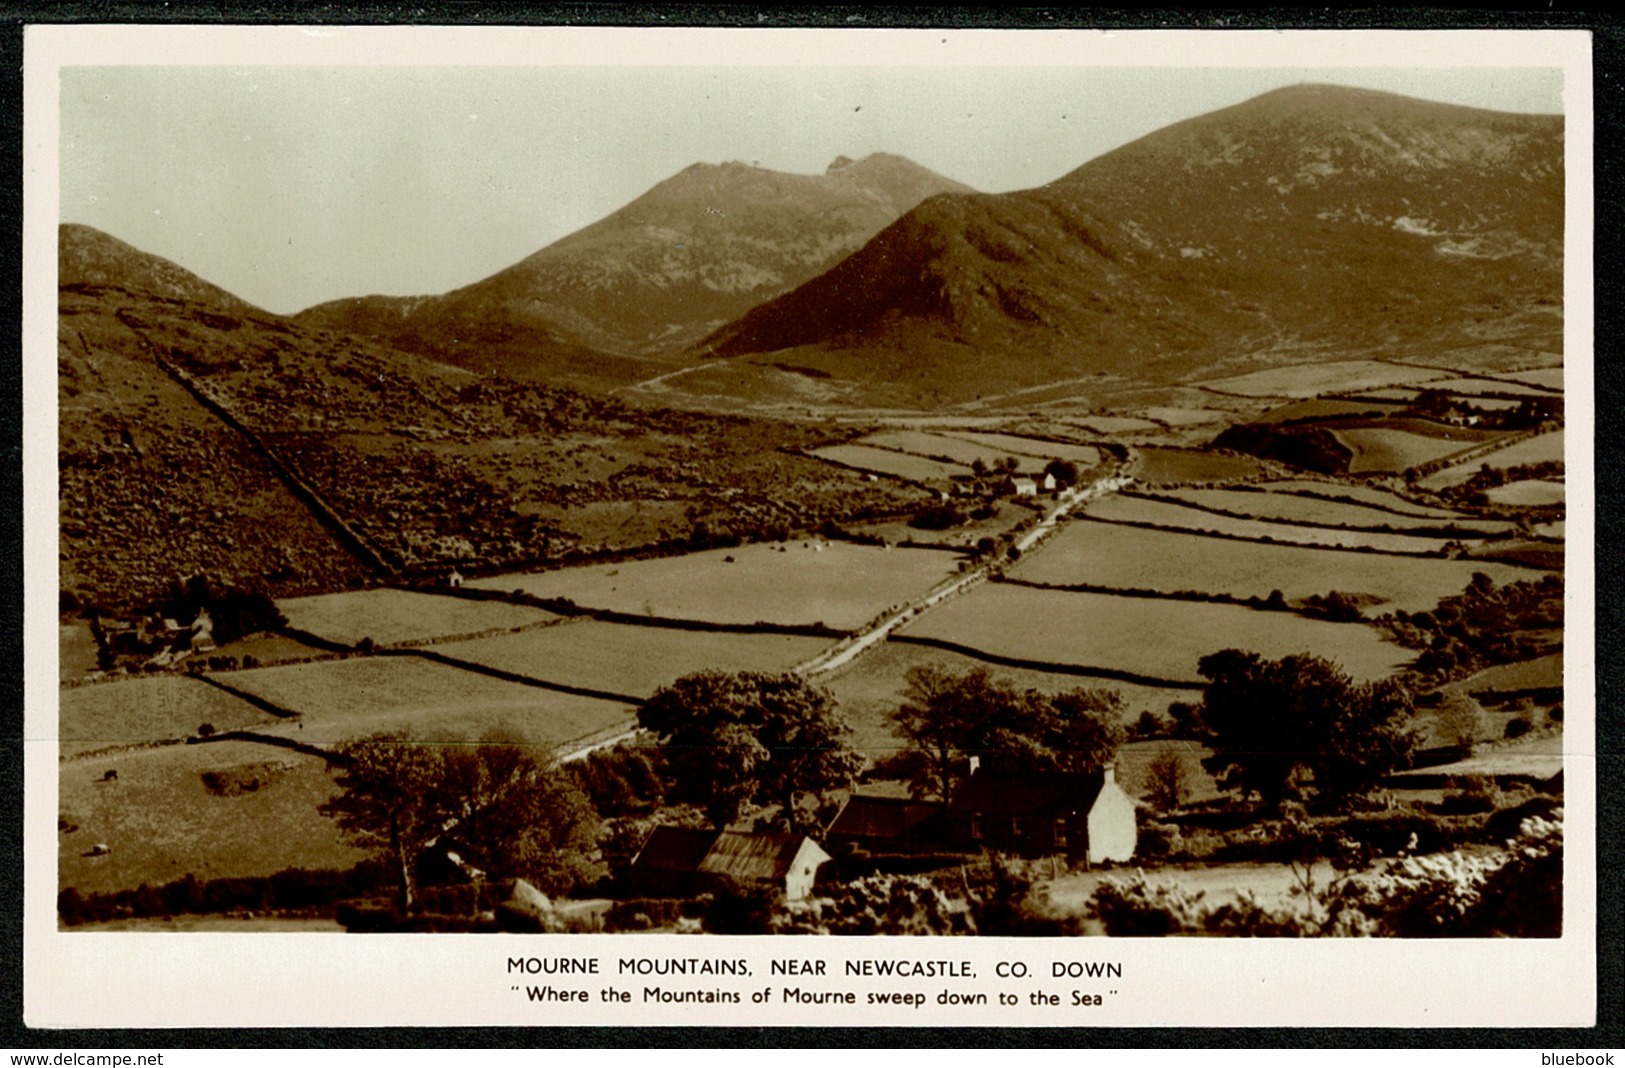 Ref 1253 - Real Photo Postcard - Cottages Mourne Mountains Near Newcastle Co. Down Ireland - Down